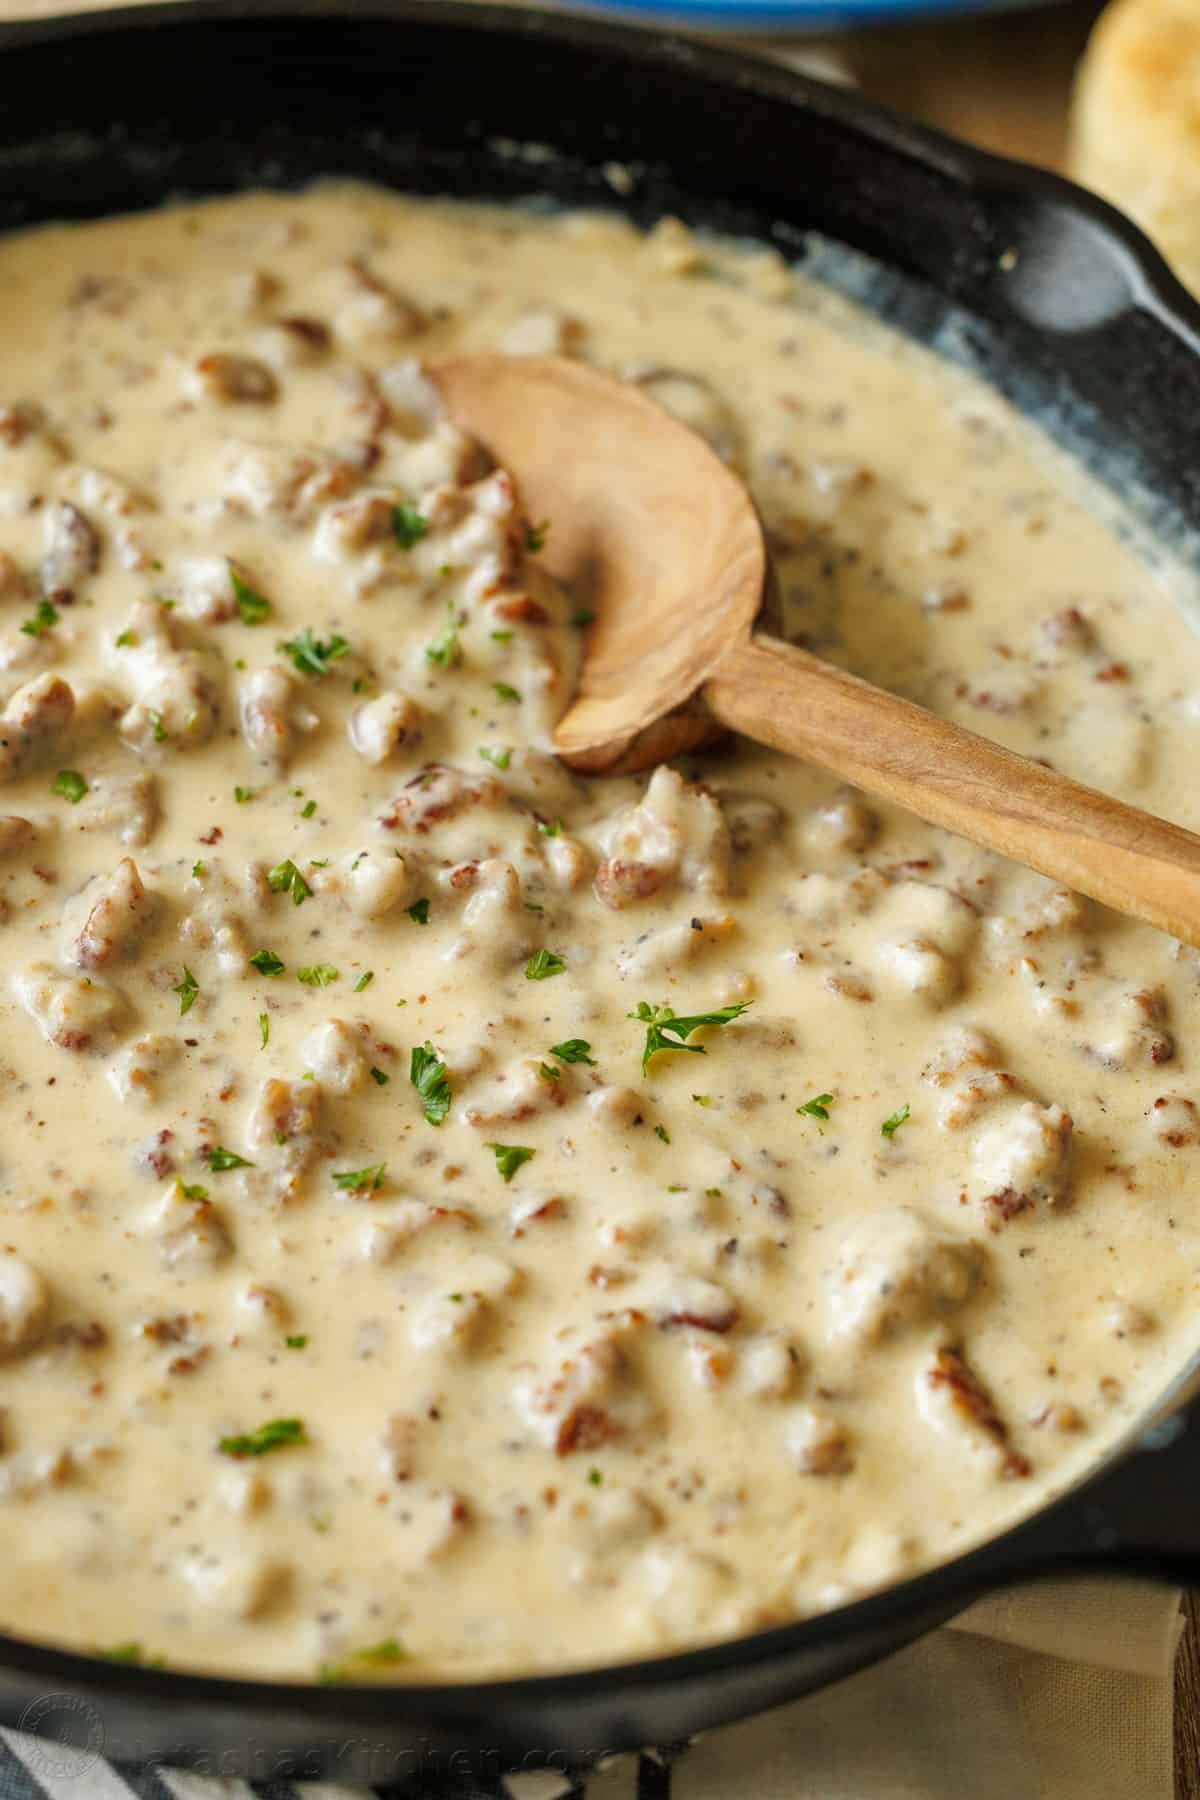 Southern white sauce with pork crumbles in a pan with a wooden spoon